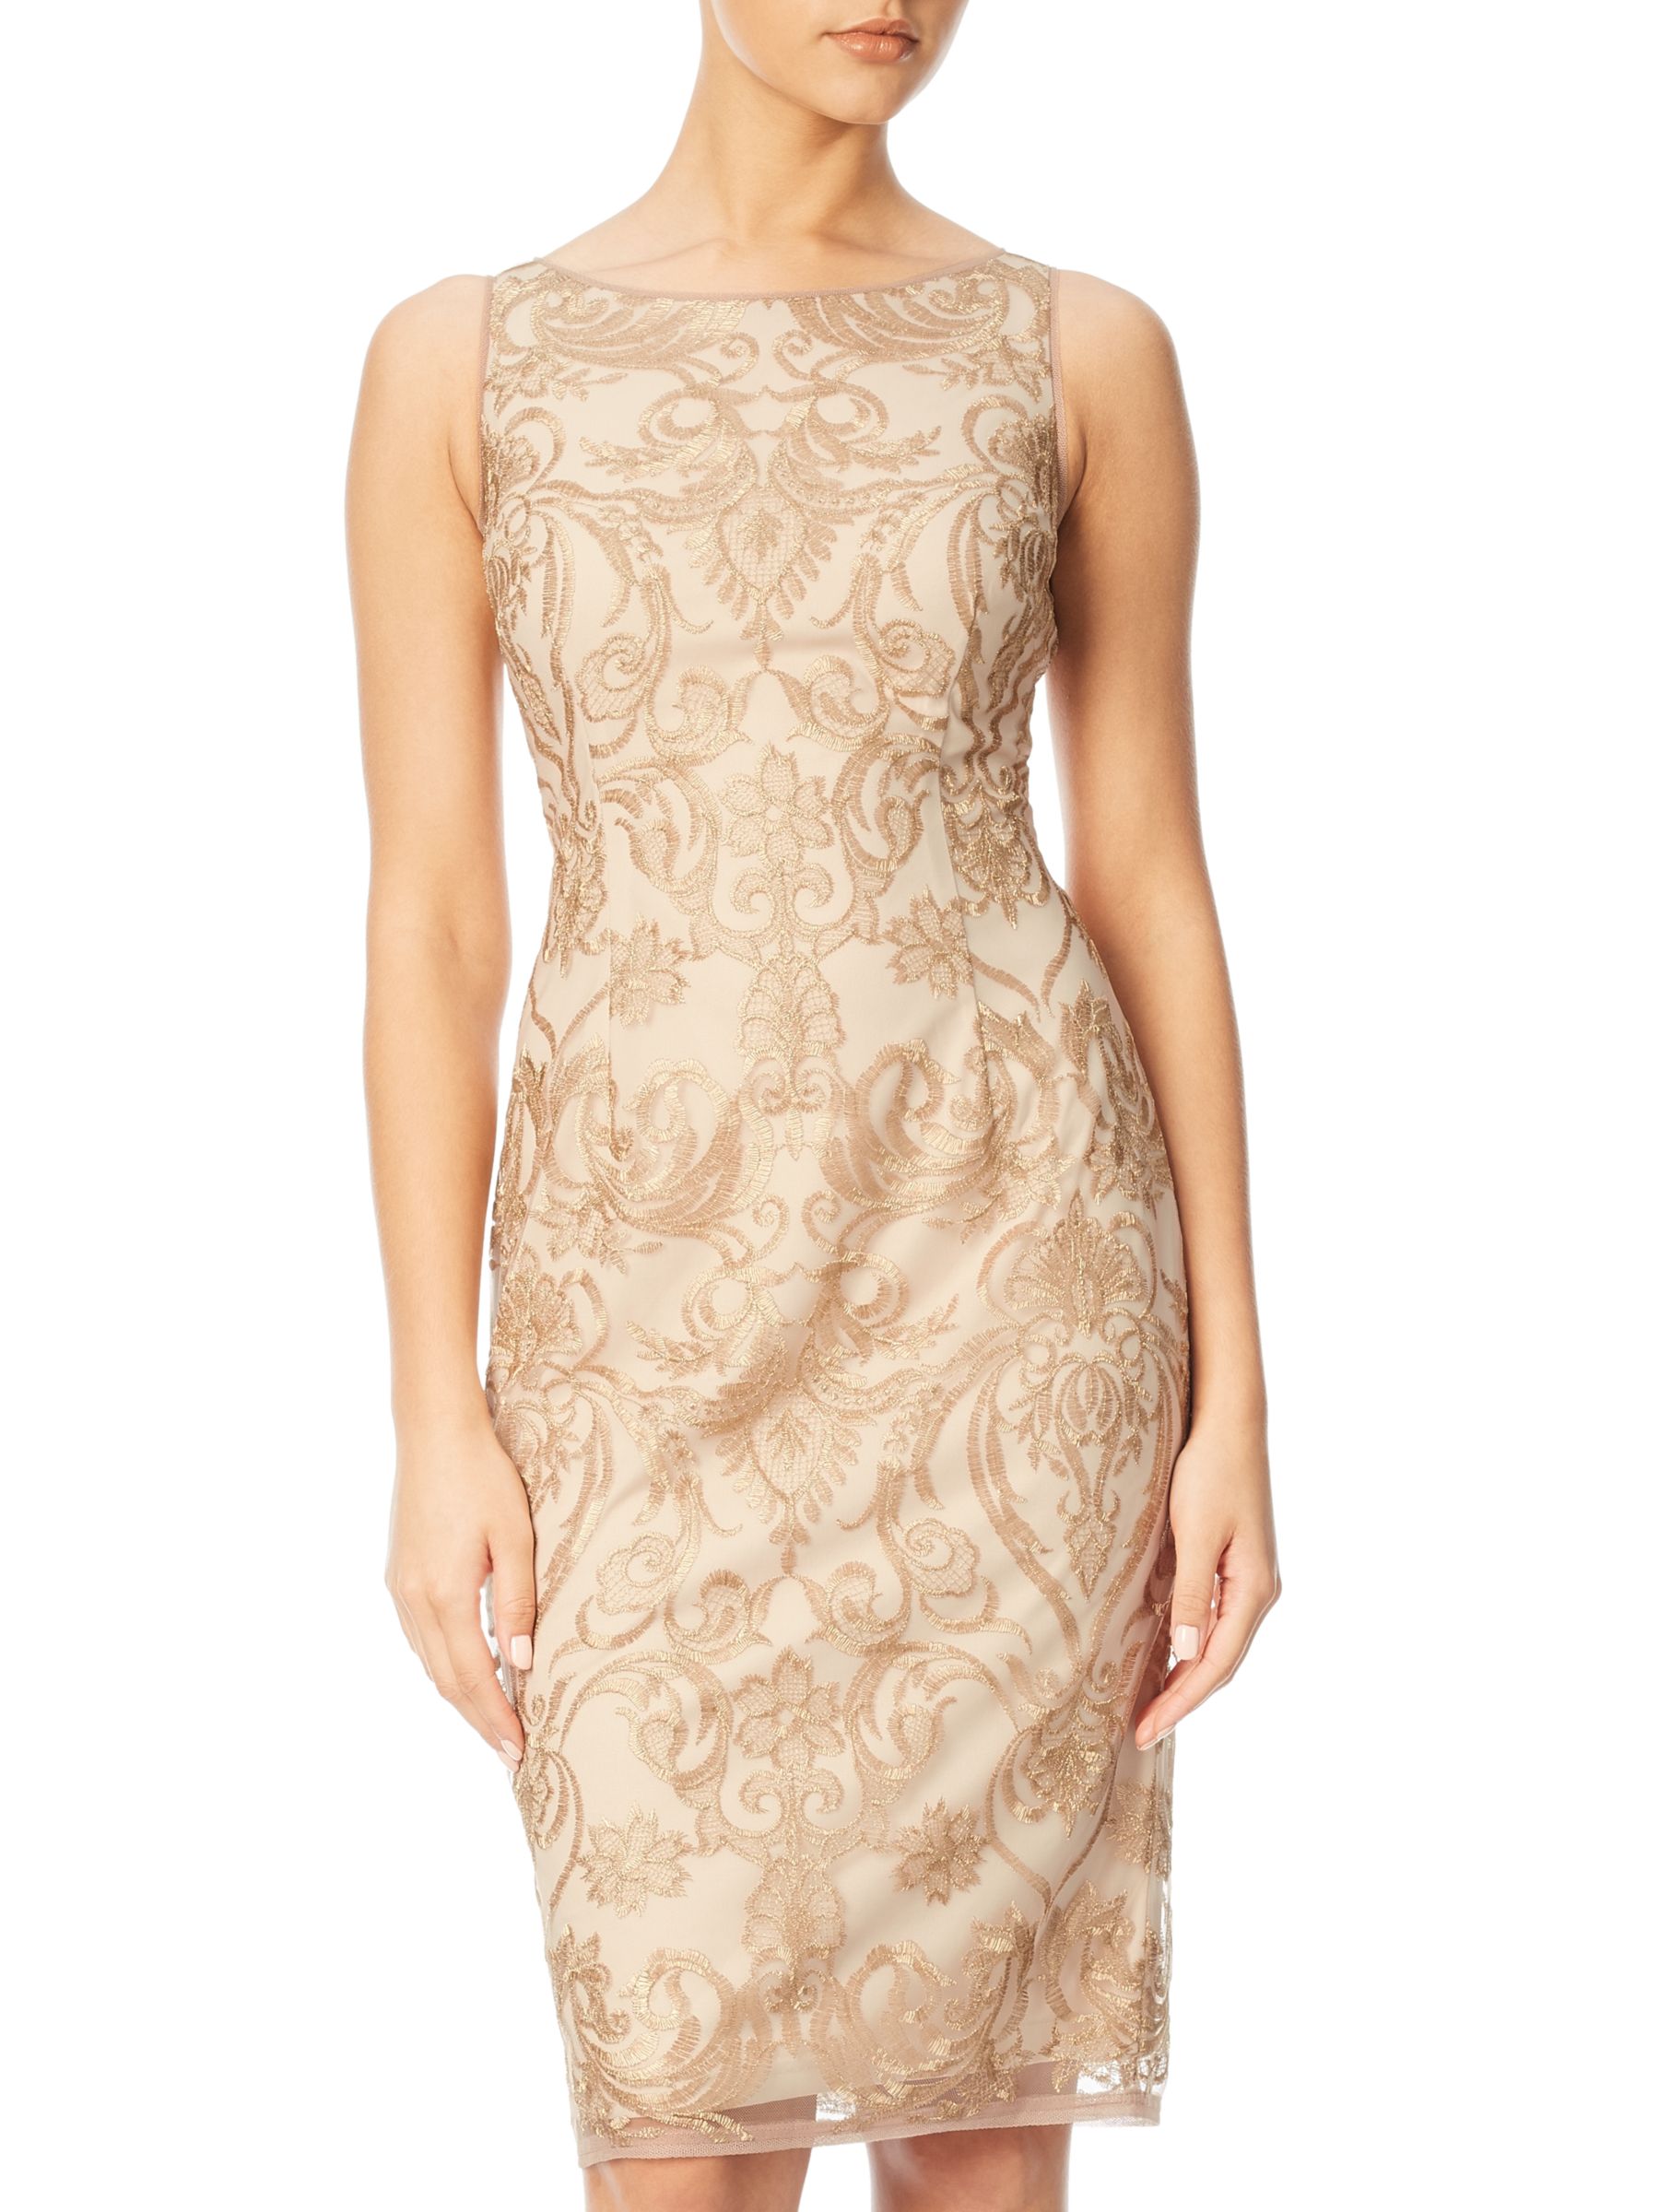 Adrianna Papell Sleeveless Embroidered Floral Cocktail Dress, Rose Gold/Nude